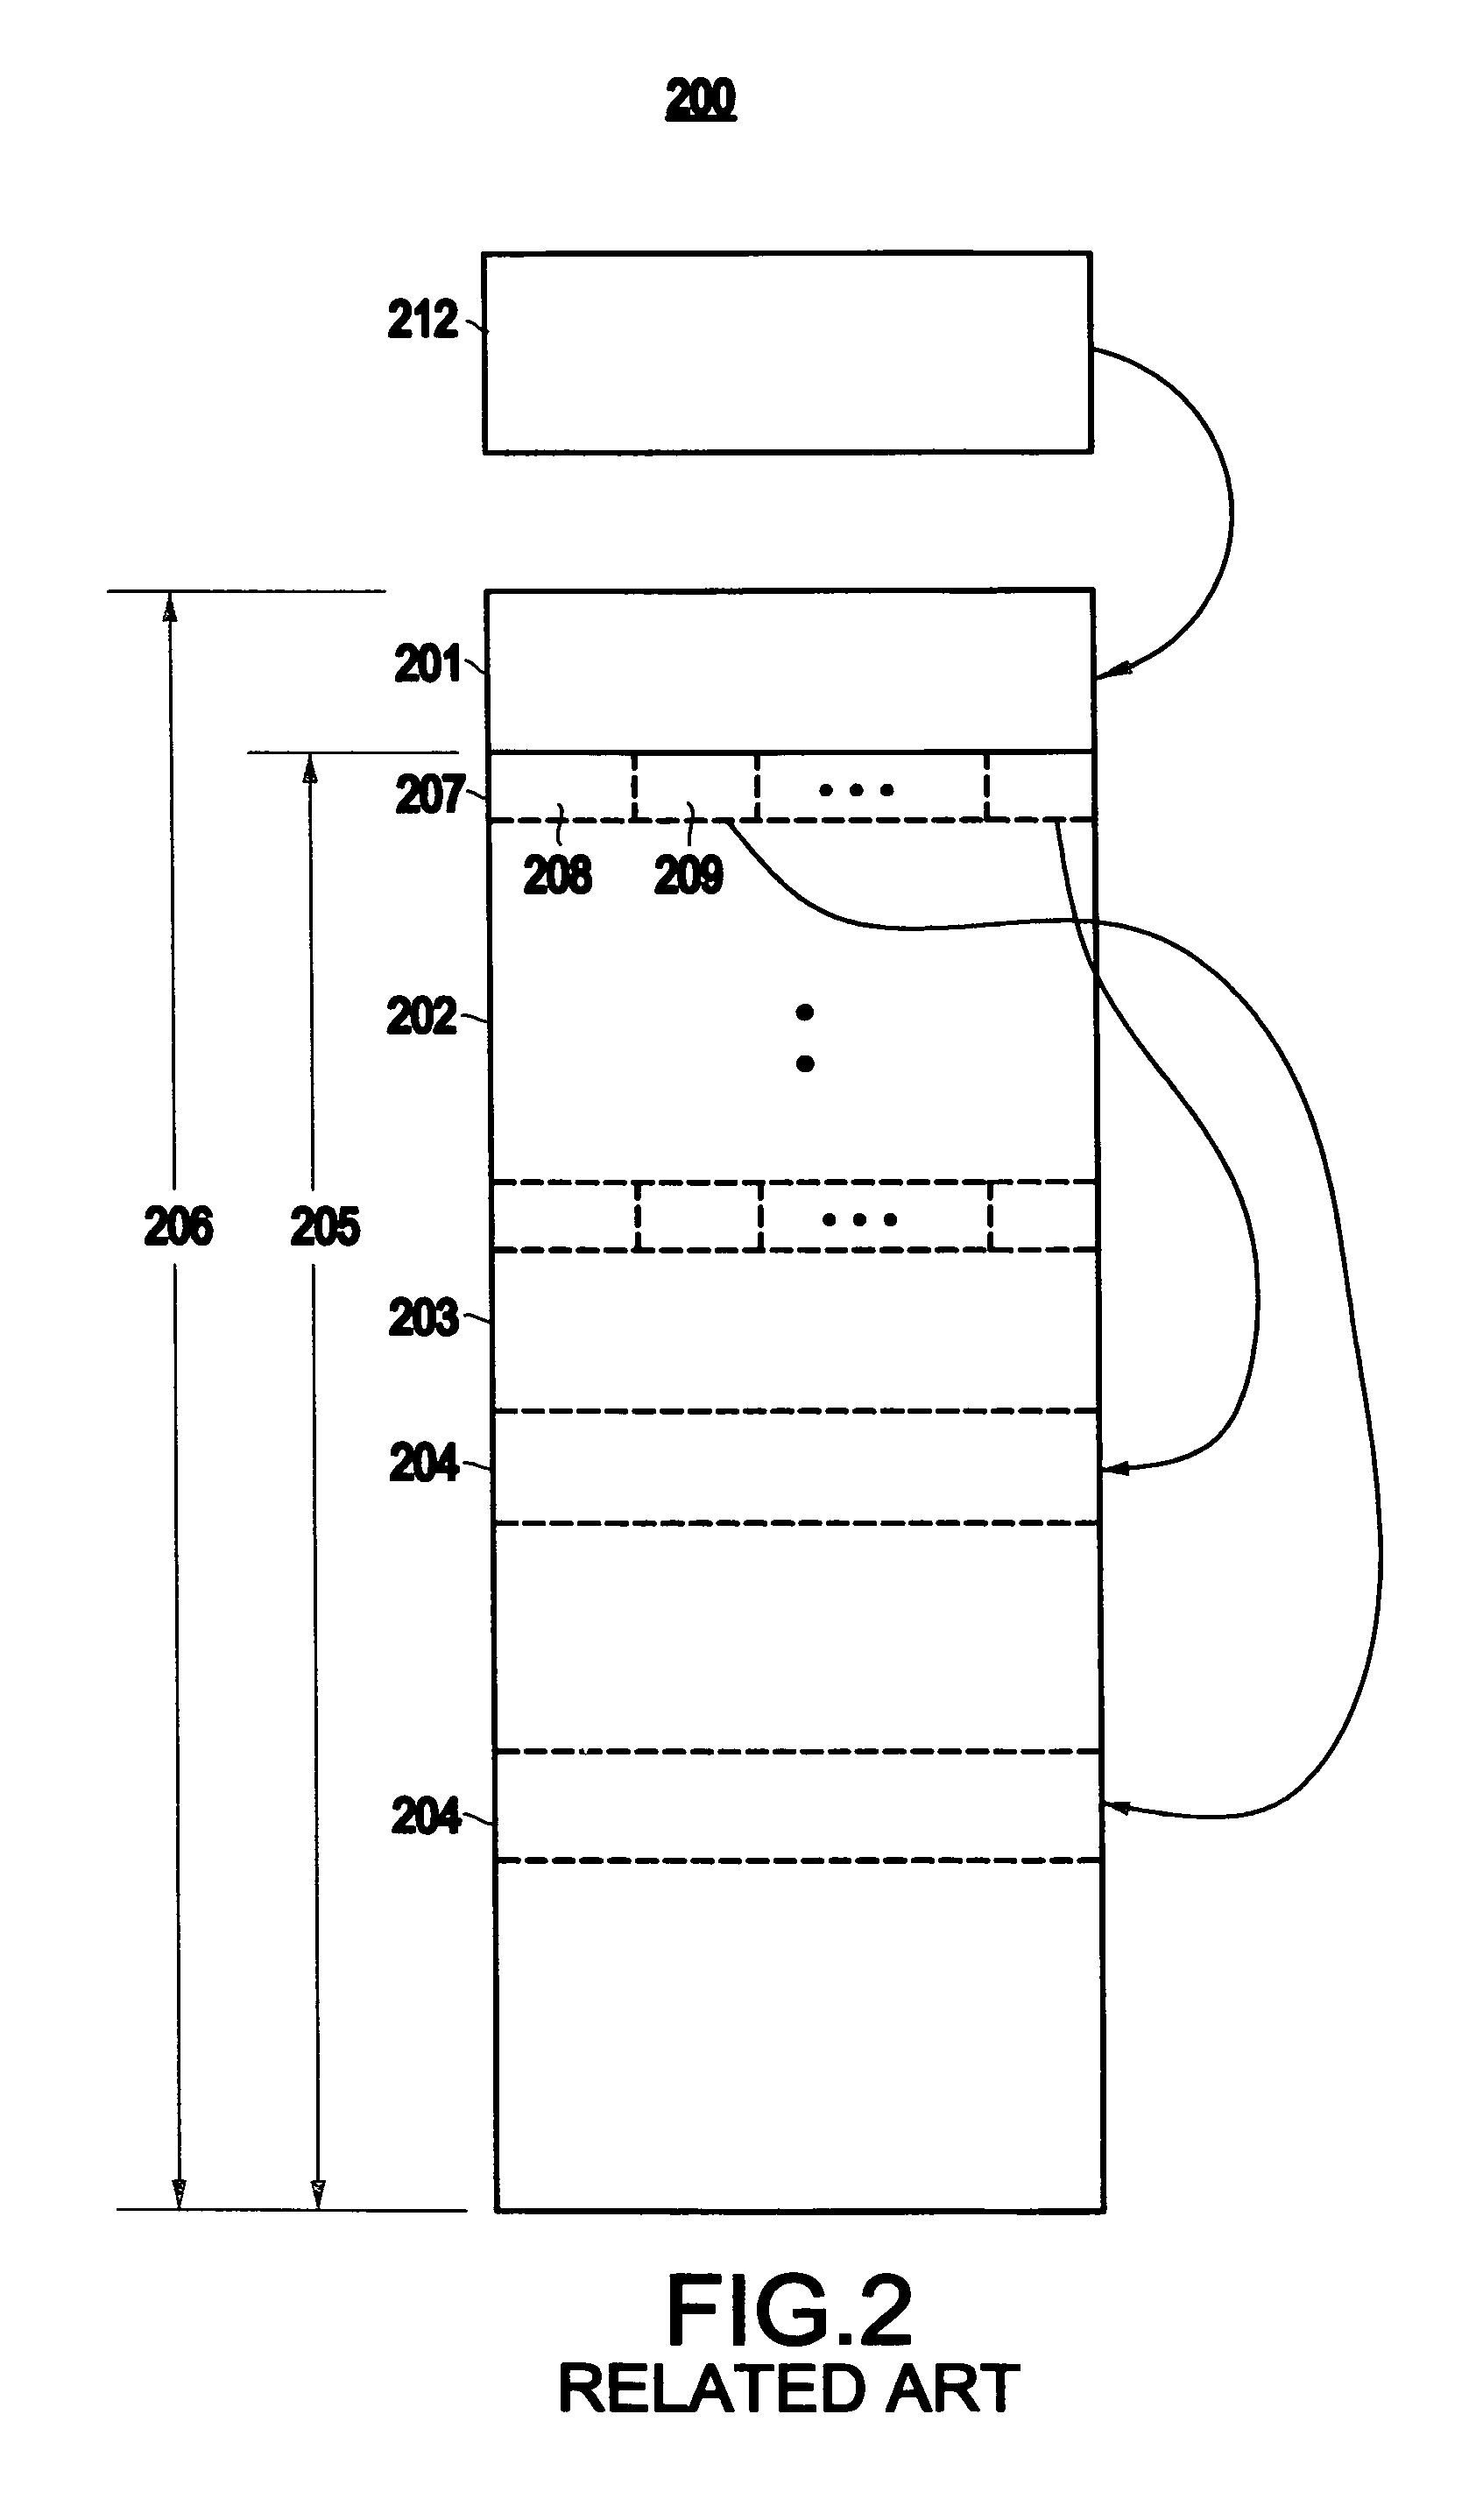 Computer compressed memory system and method for storing and retrieving data in a processing system